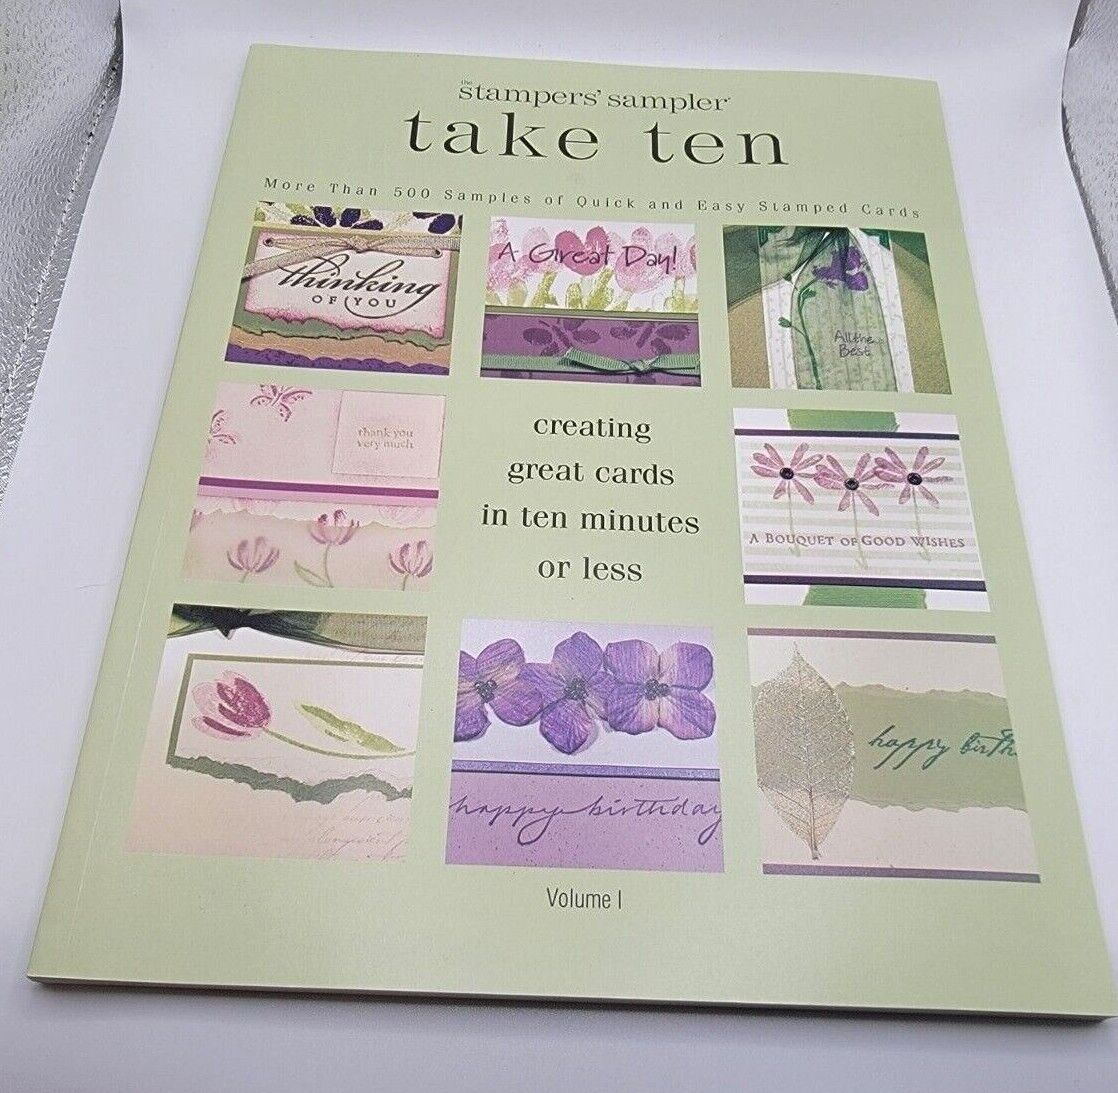 The Stampers' Sampler Take Ten Volume I Book Rubber Stamps Crafting Hobby